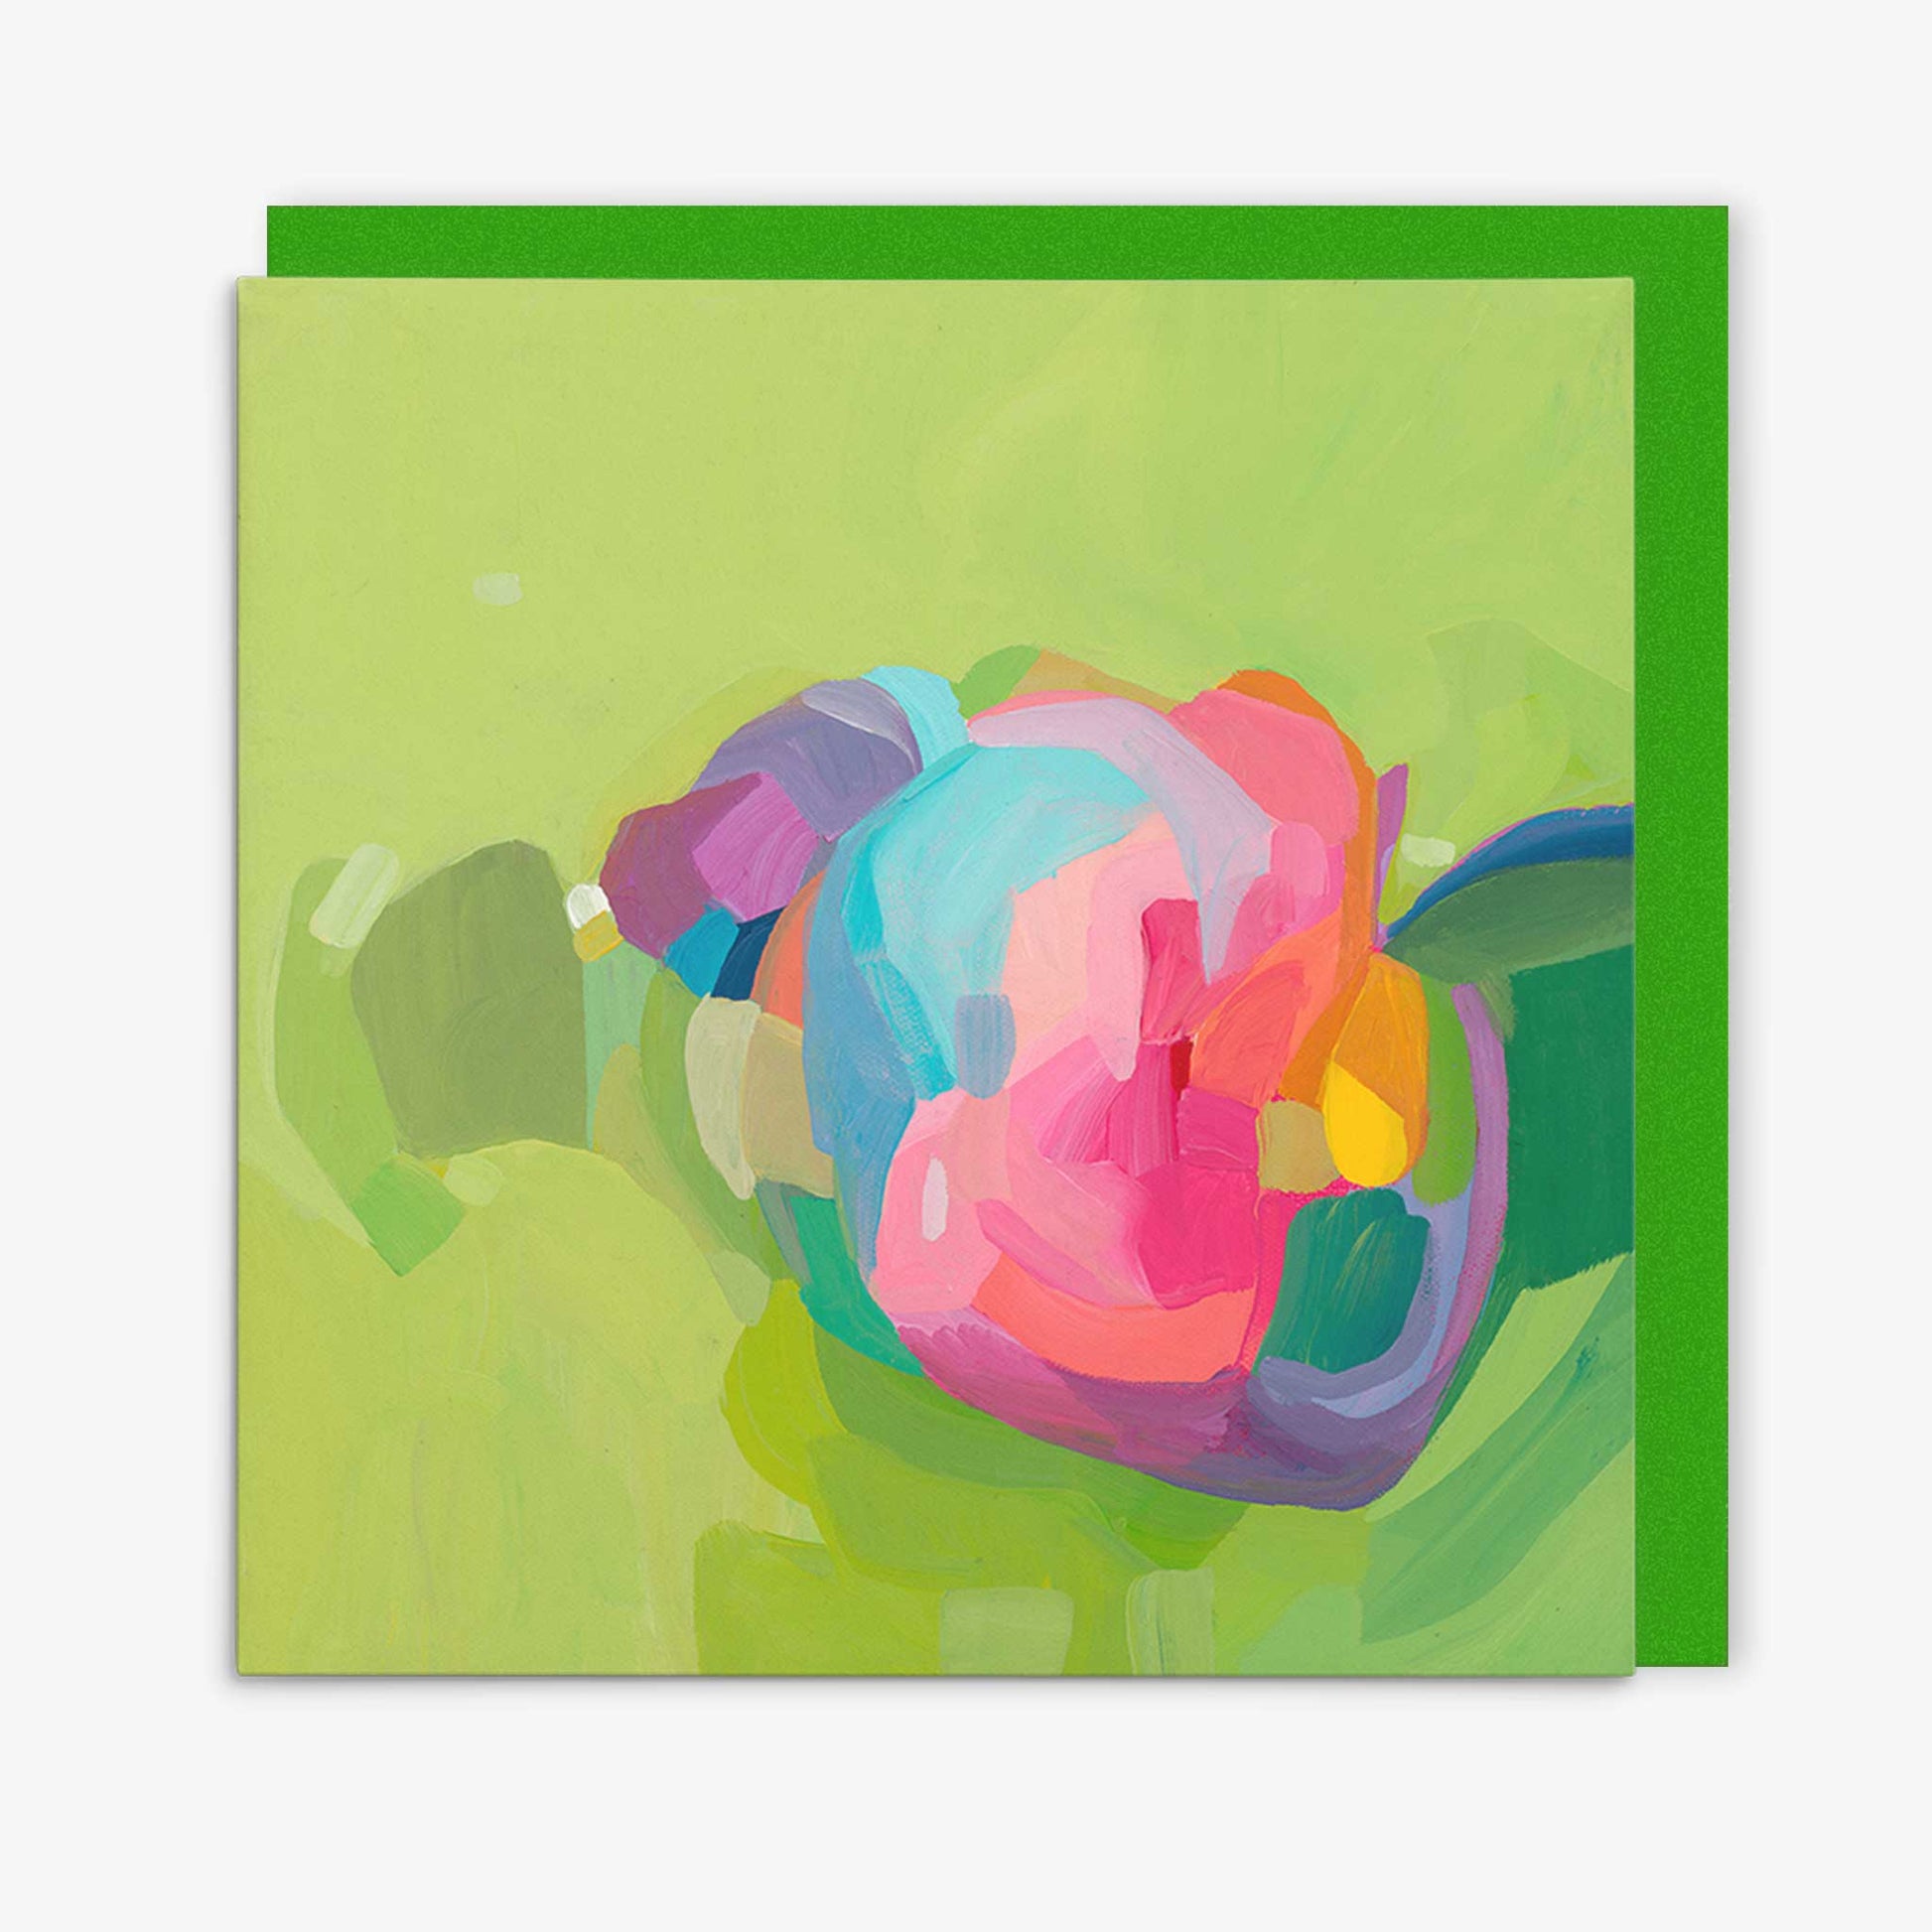 green abstract art greeting card with matching green envelope